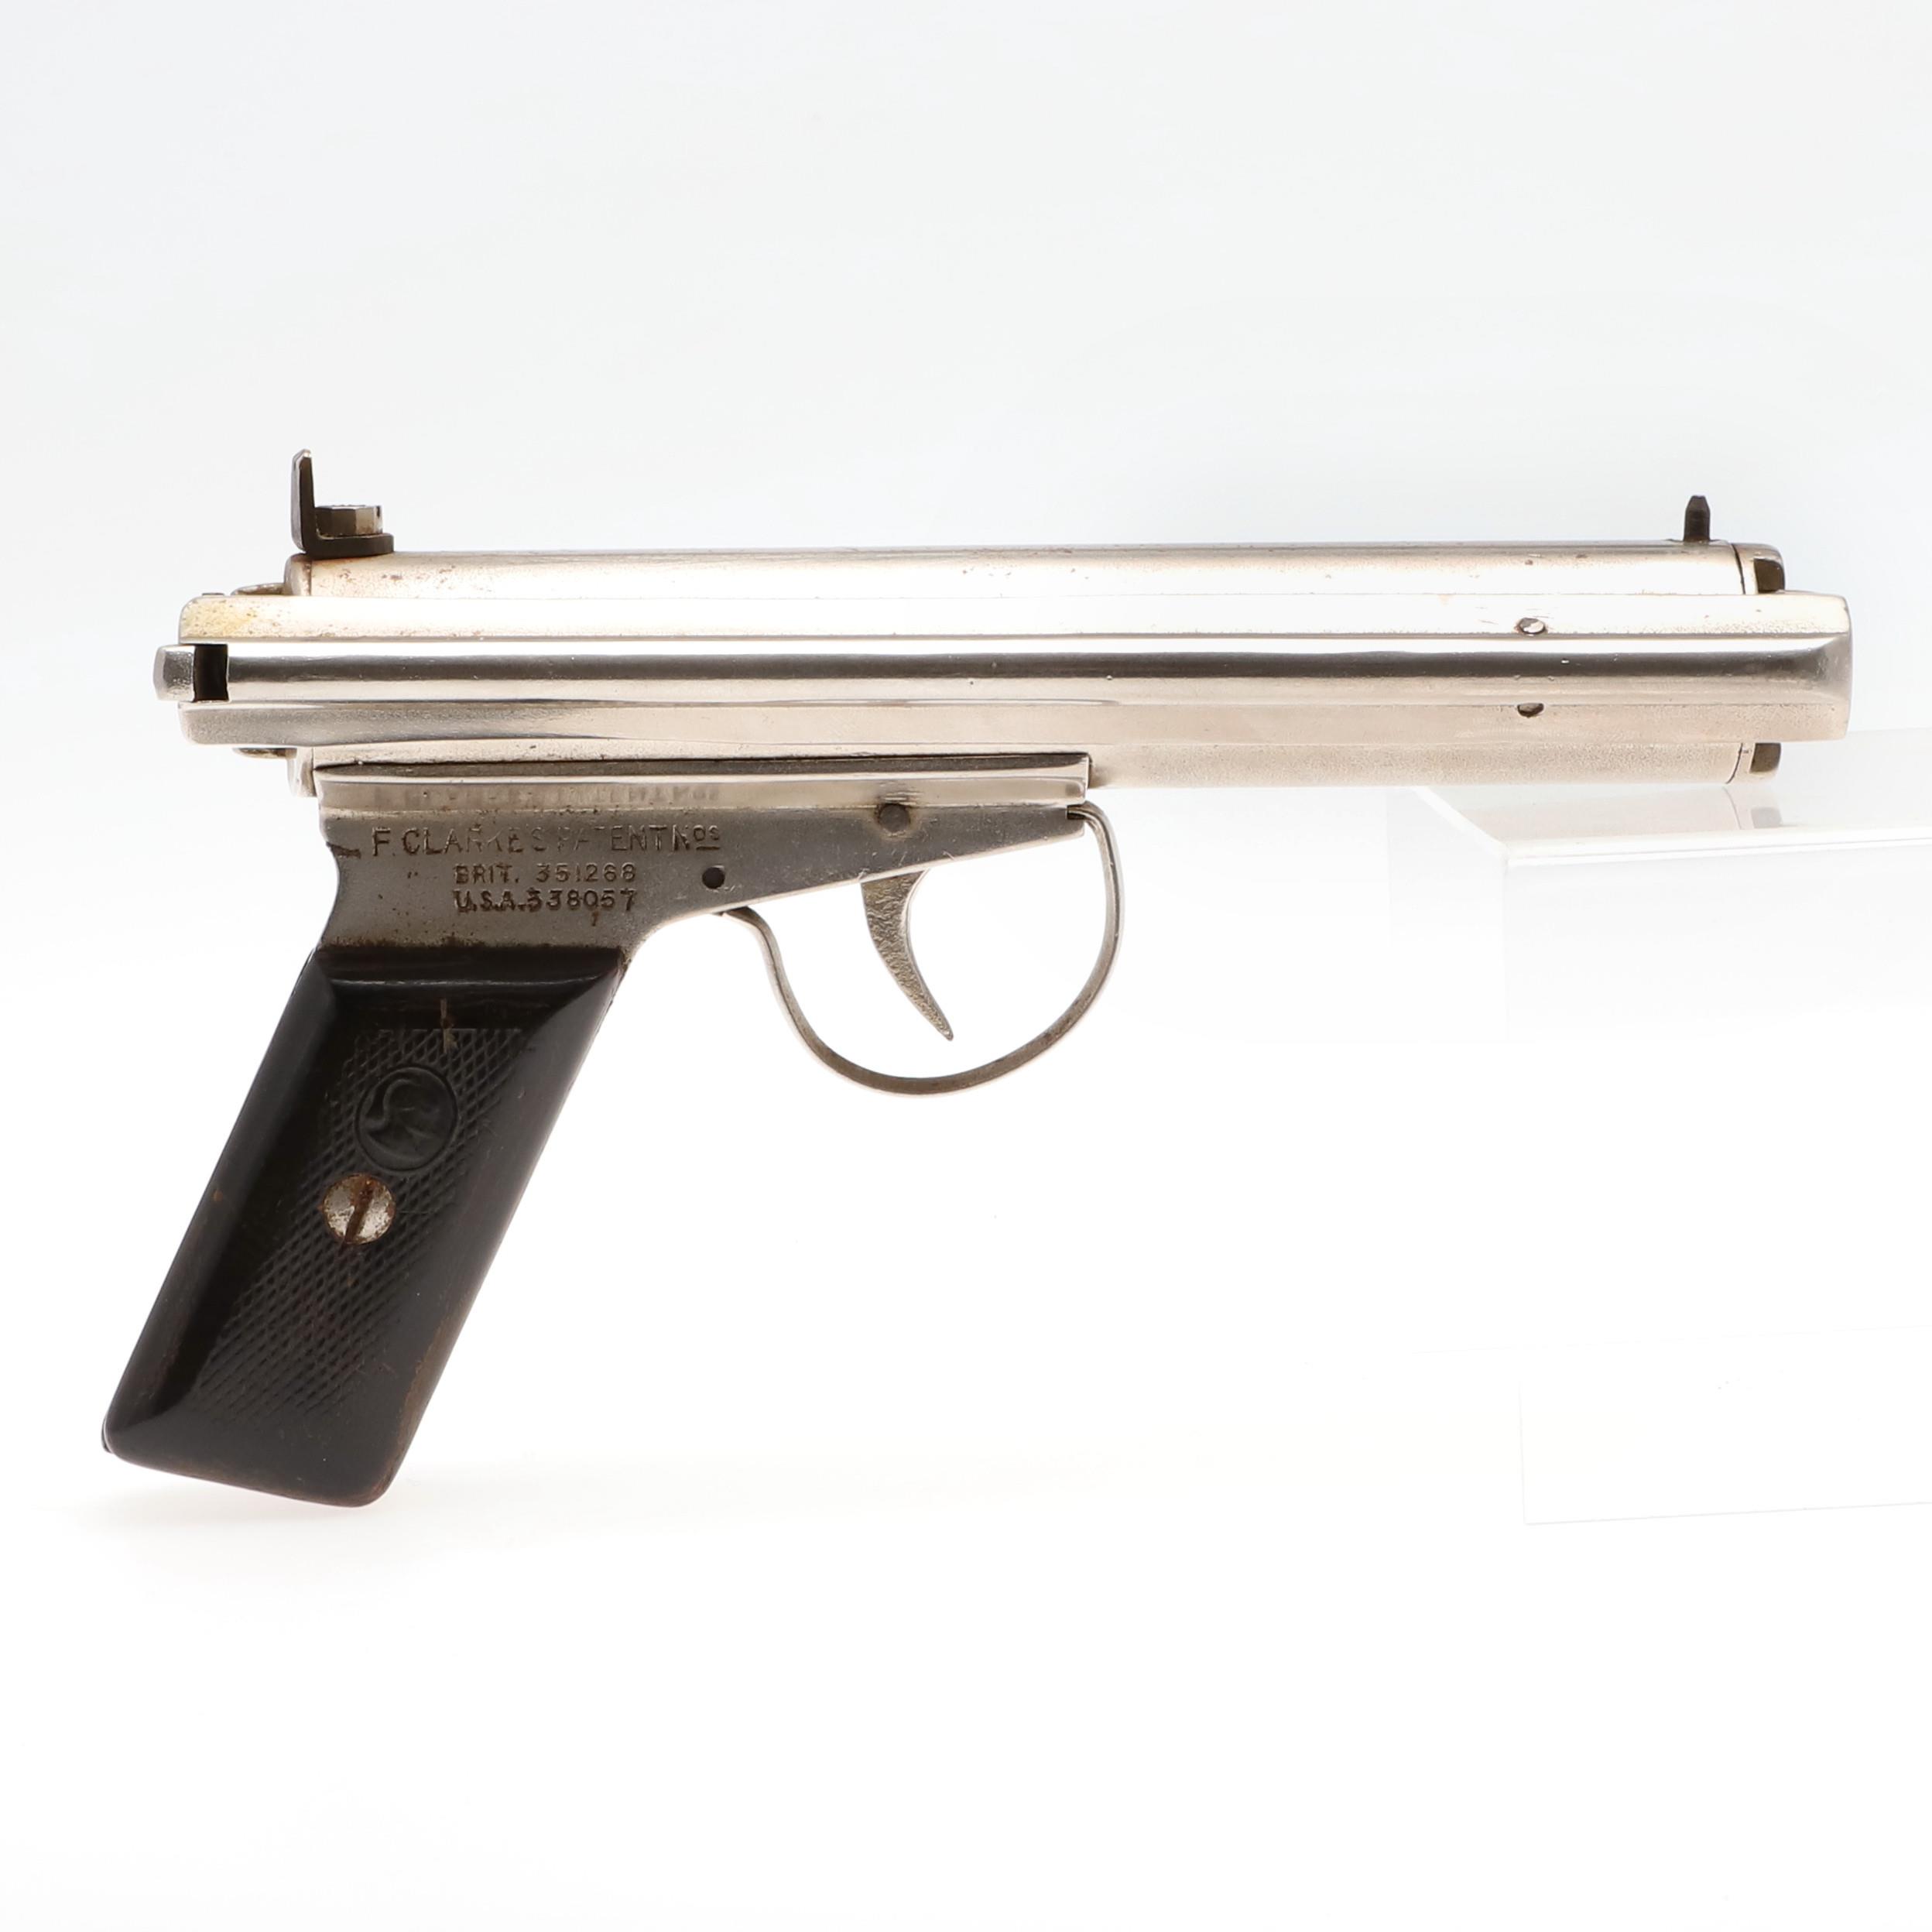 AN ACCLES AND SHELVOKE 'WARRIOR' .177 AIR PISTOL. - Image 2 of 10